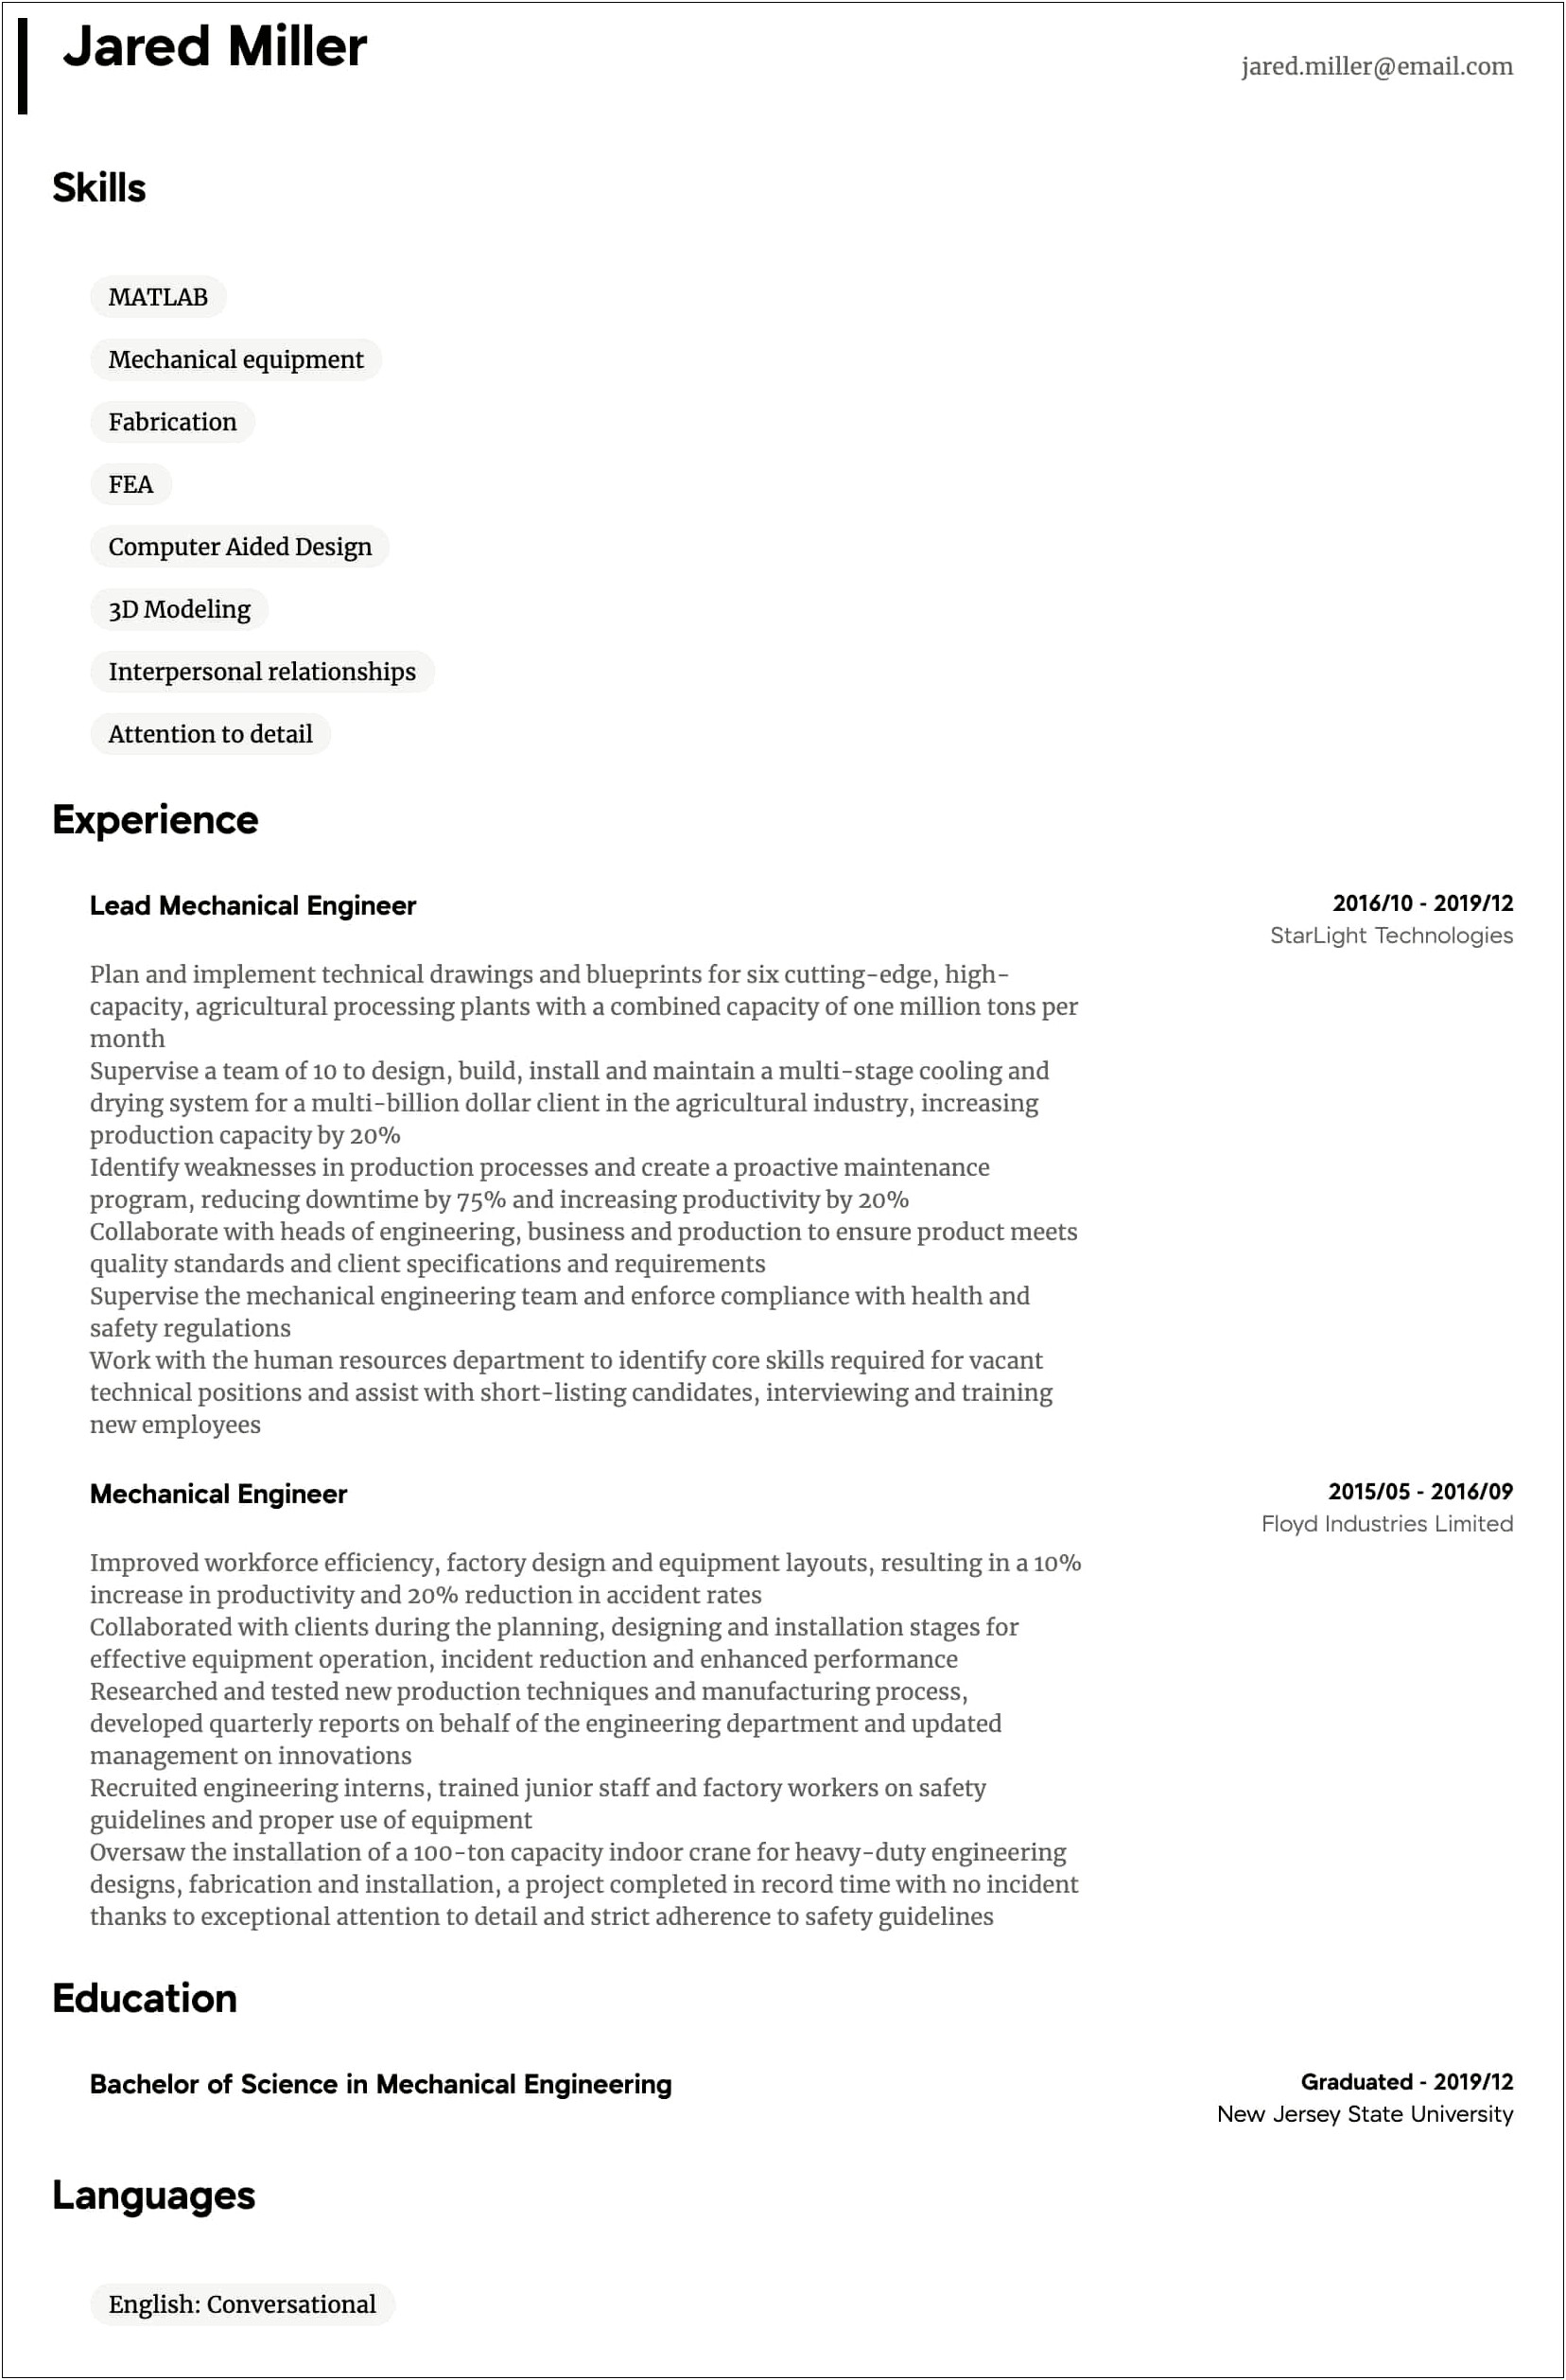 Resume Summary Expample For Mechanical Engineer